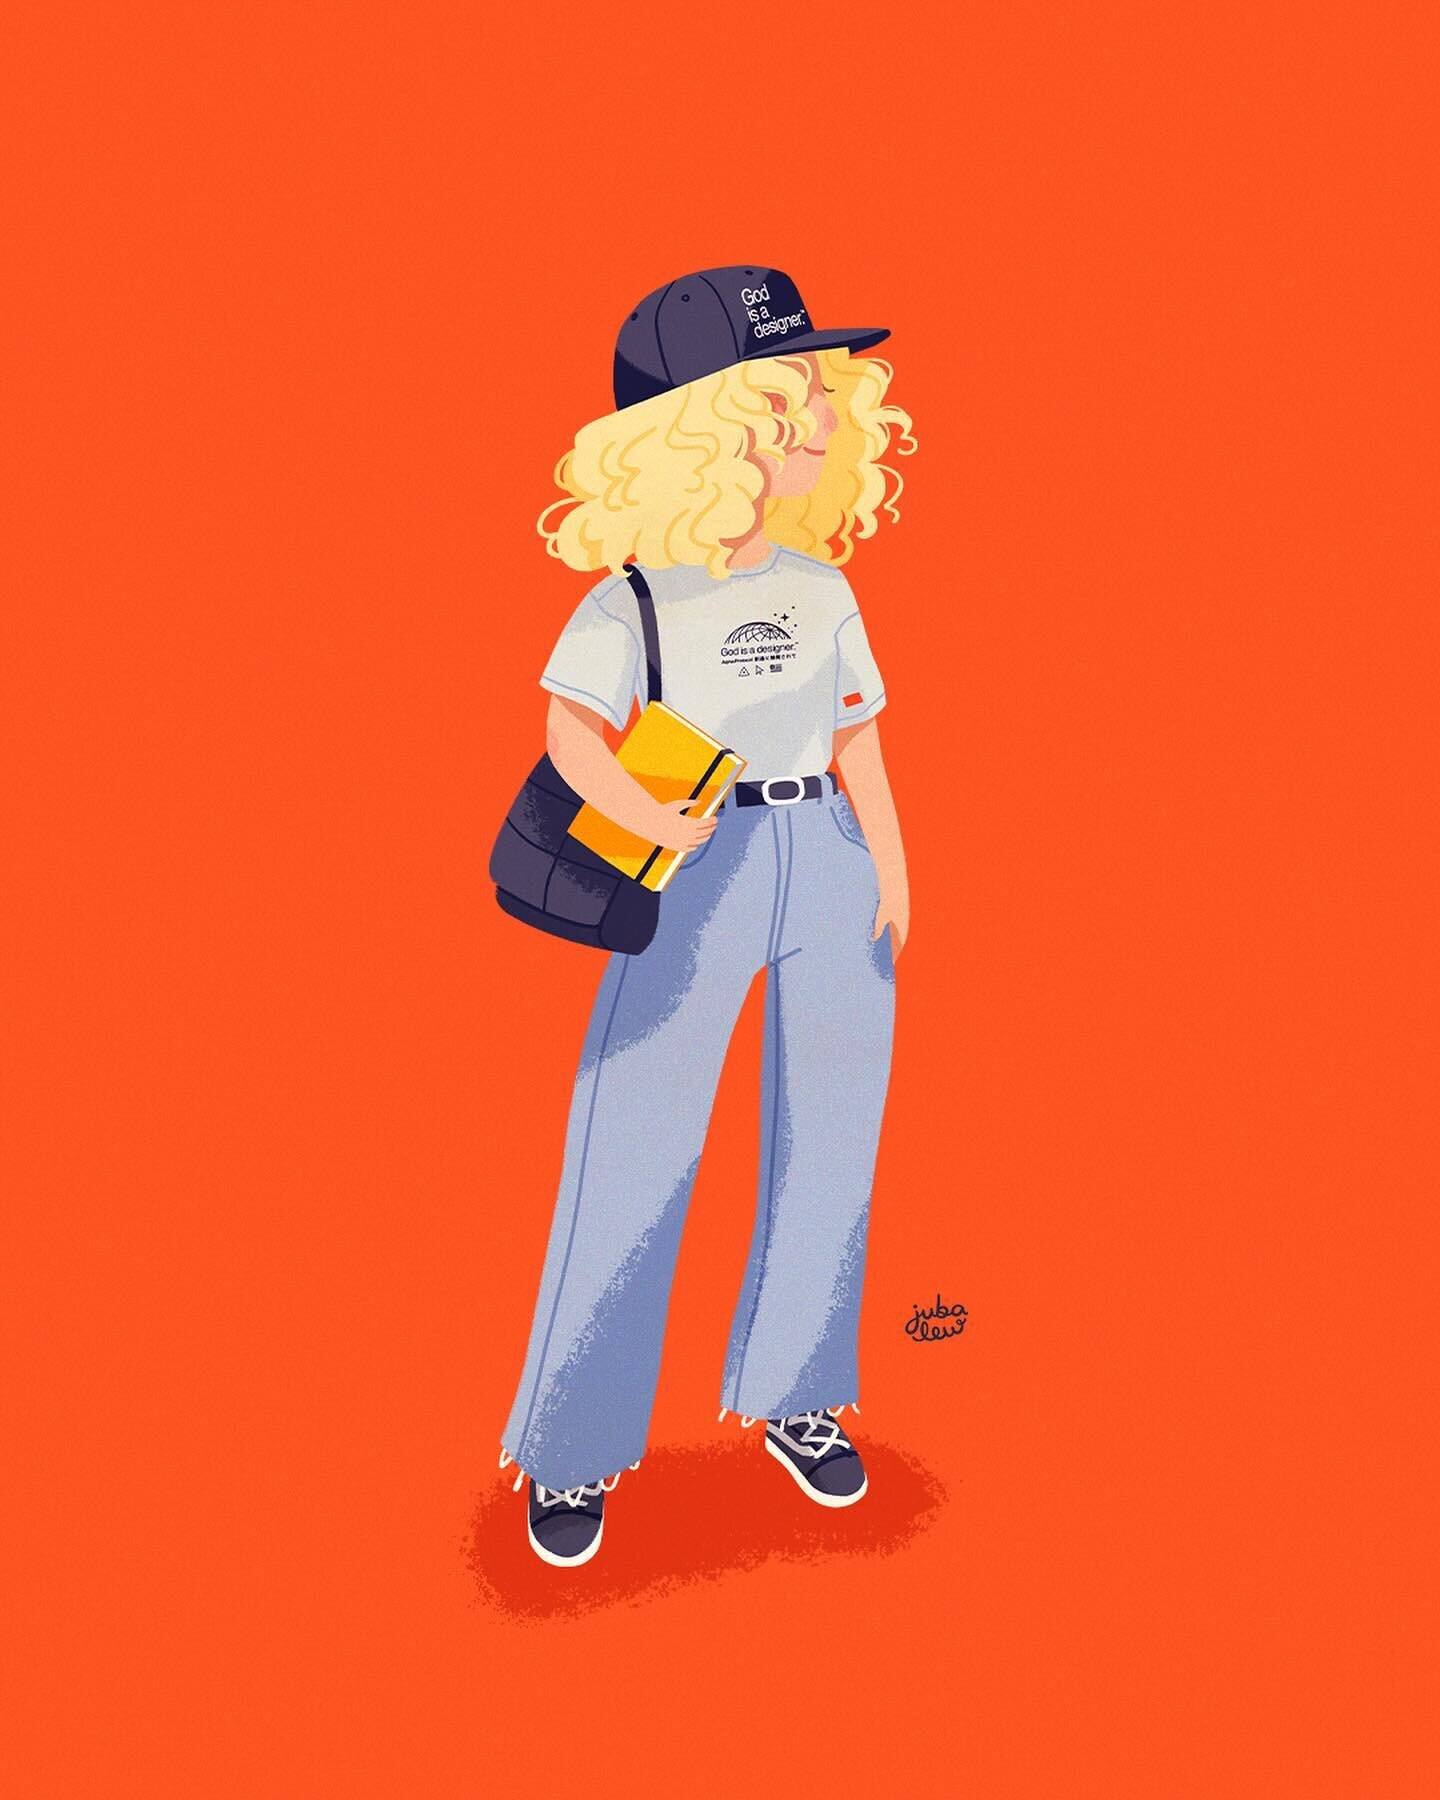 Outfit of the day &mdash; GIAD&trade; gear fit 🔶

I have purchased the iconic God Is A Designer Snapback a few years ago, and now they have this cute shirt that I dig ✨

Super fun to see the fit together in this illustration!!

Swipe for details, an